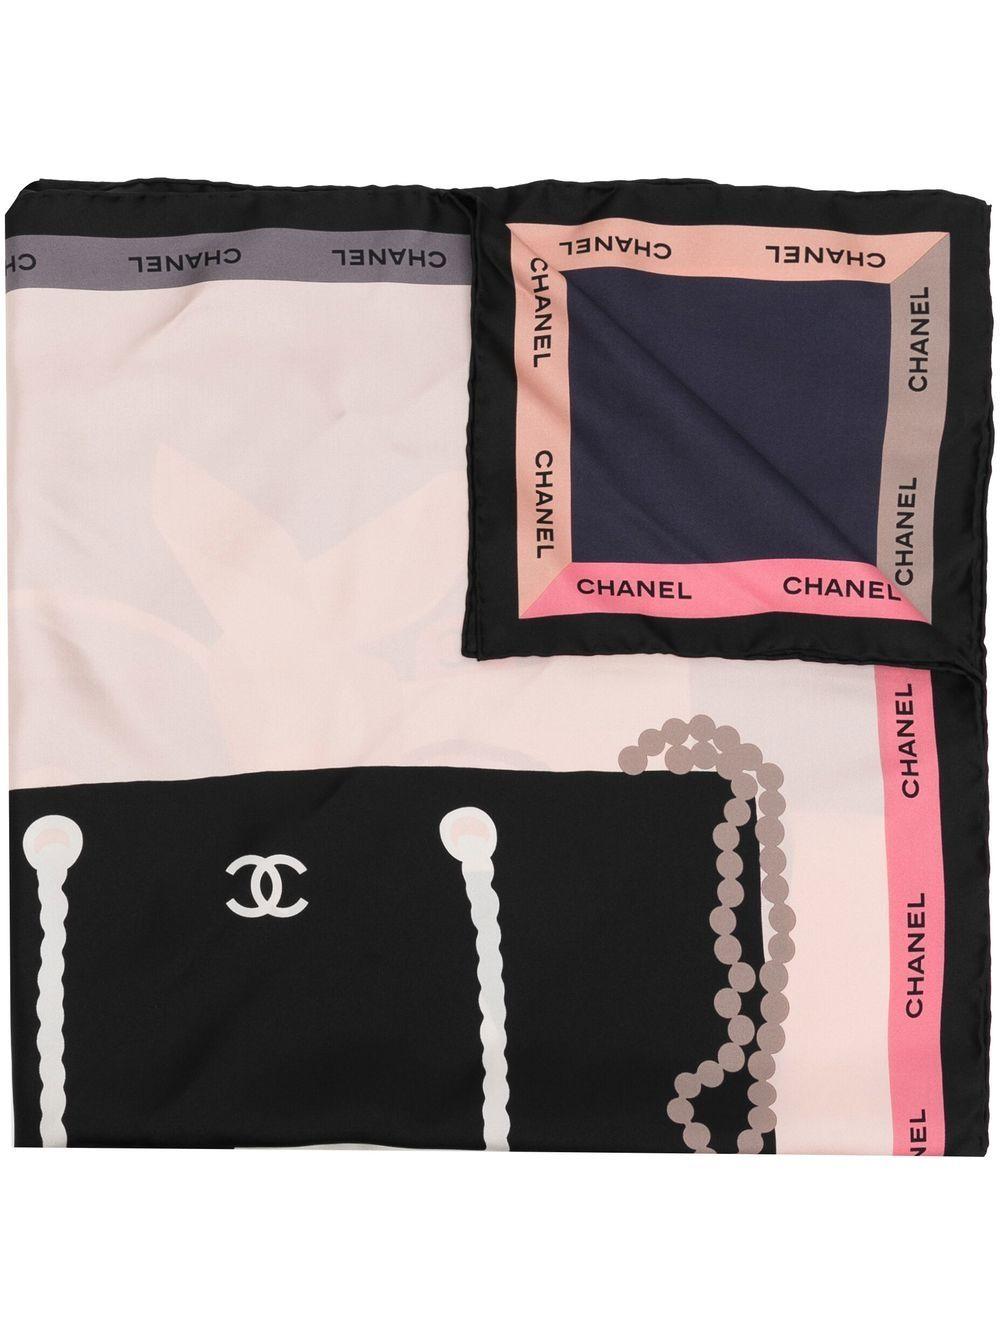 Displaying a large motif of Chanel's iconic bags, this pre-owned silk scarf has been designed in the shades of black, white, red and blue. Finished with a border of Chanel's famous logo, wear it around your neck or in your hair. 

Colour: